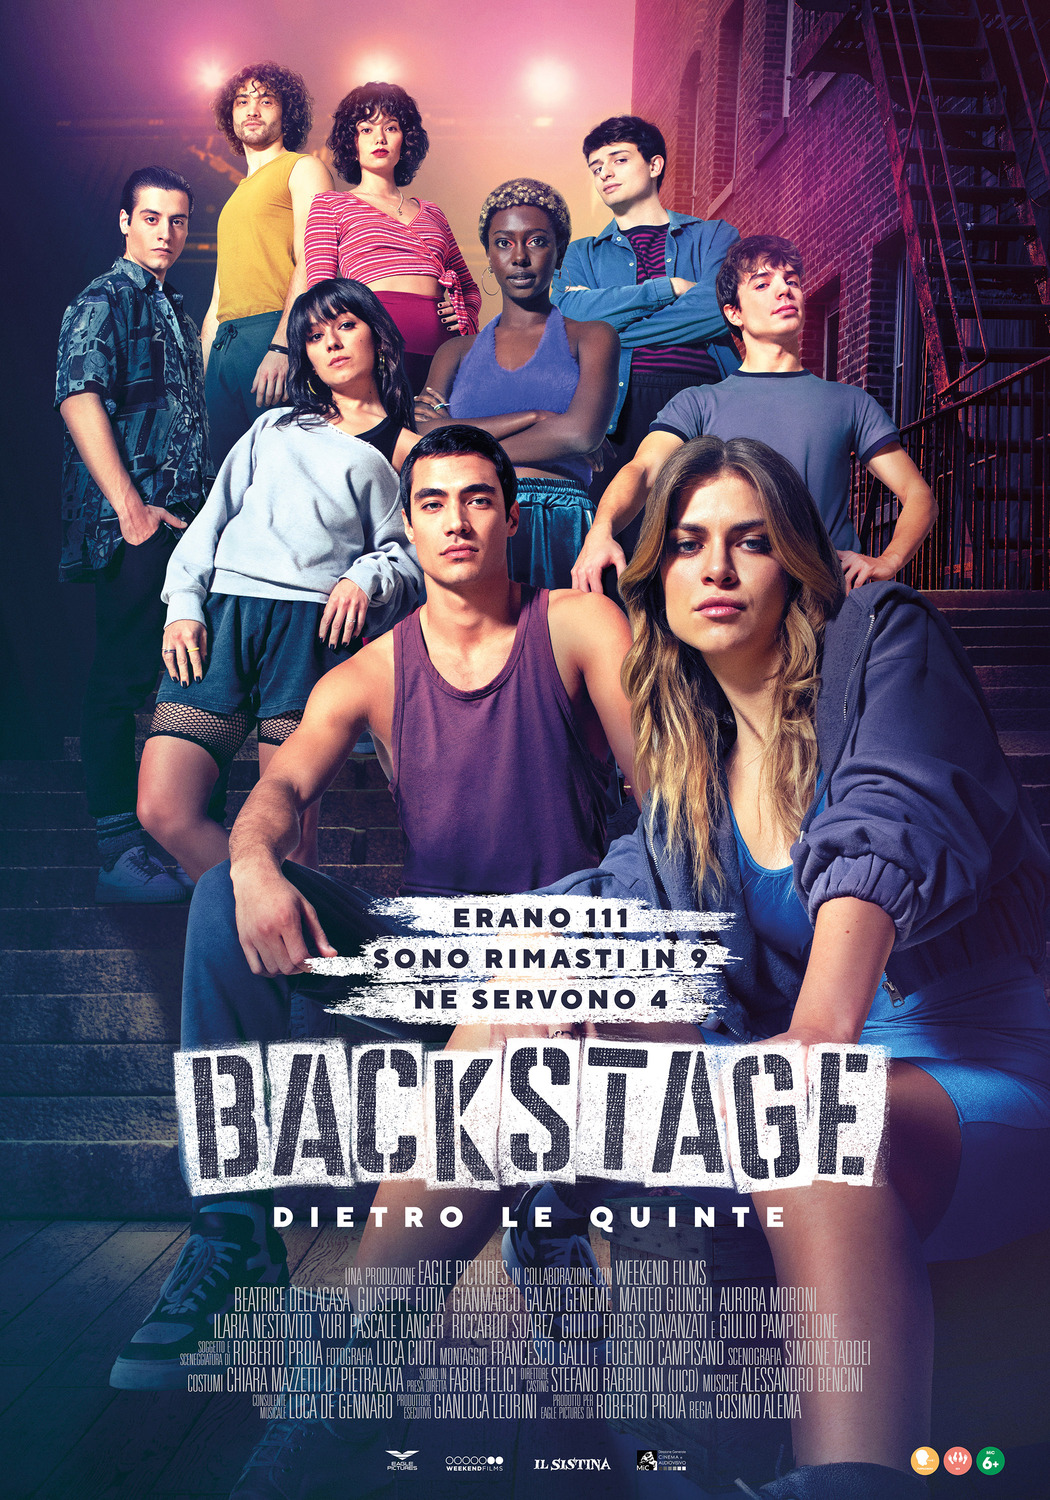 Extra Large Movie Poster Image for Backstage: dietro le quinte 